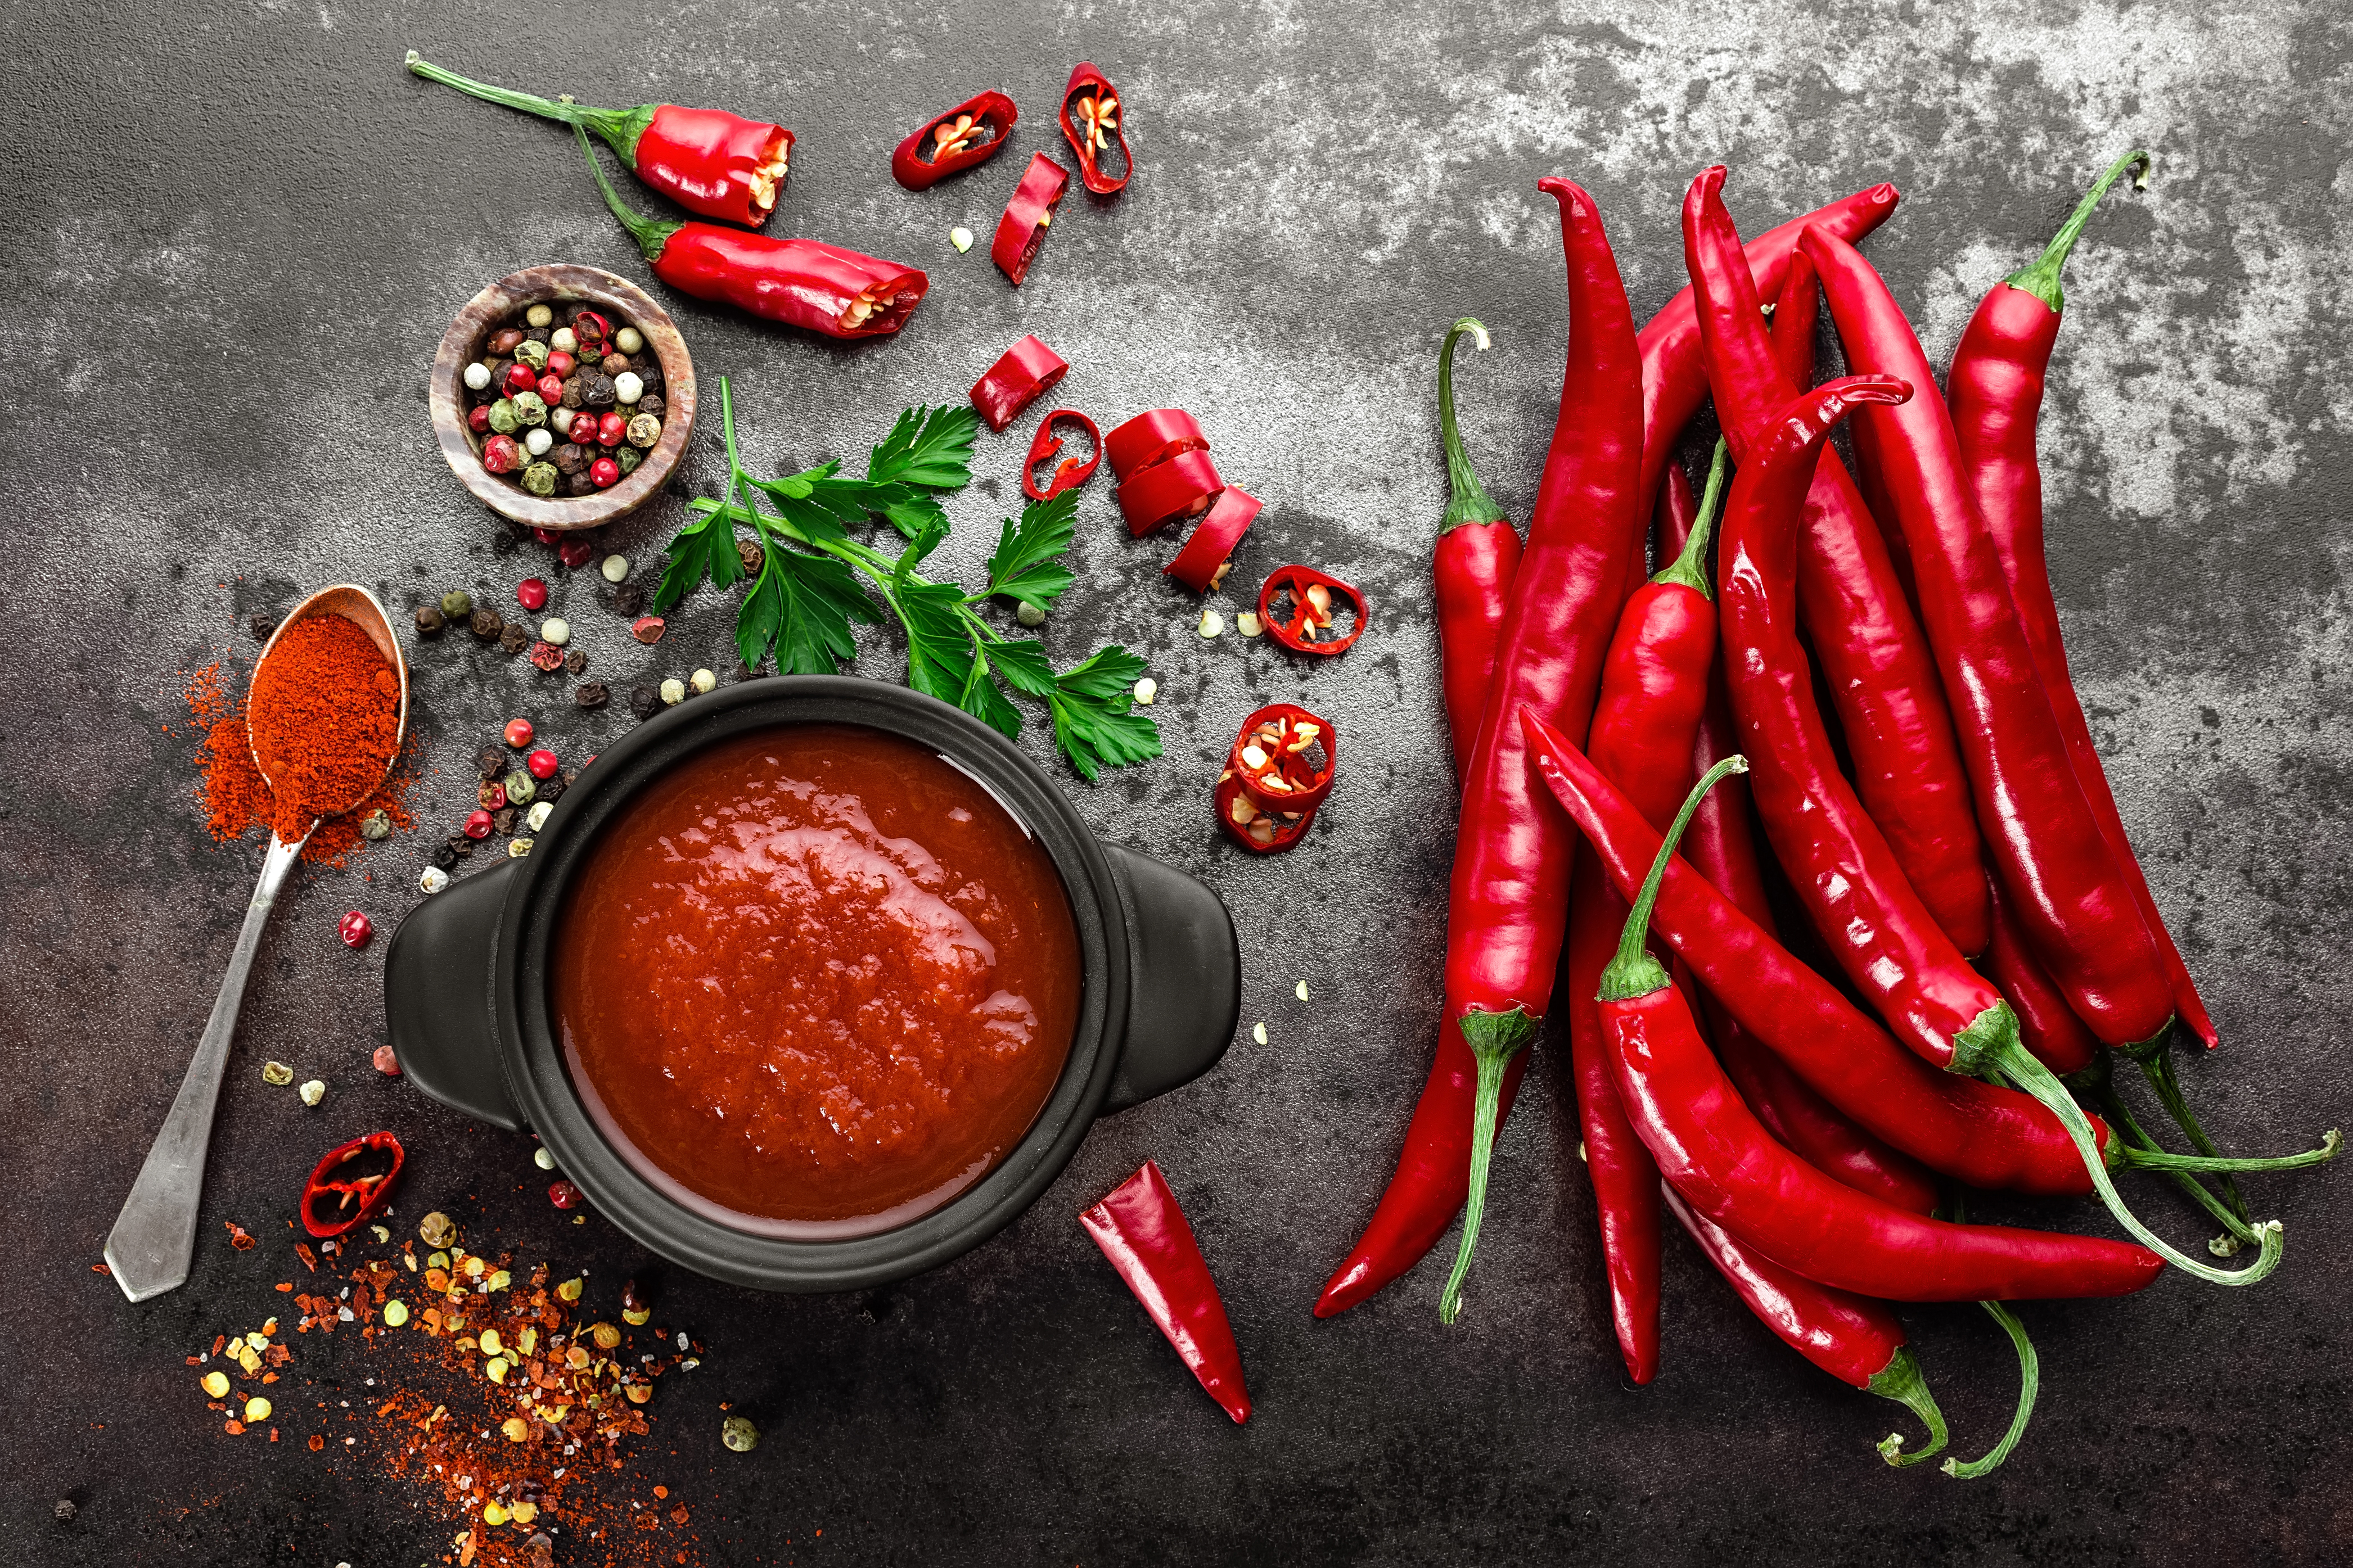 Spicy chili sauce, ketchup, red chilis on dark background